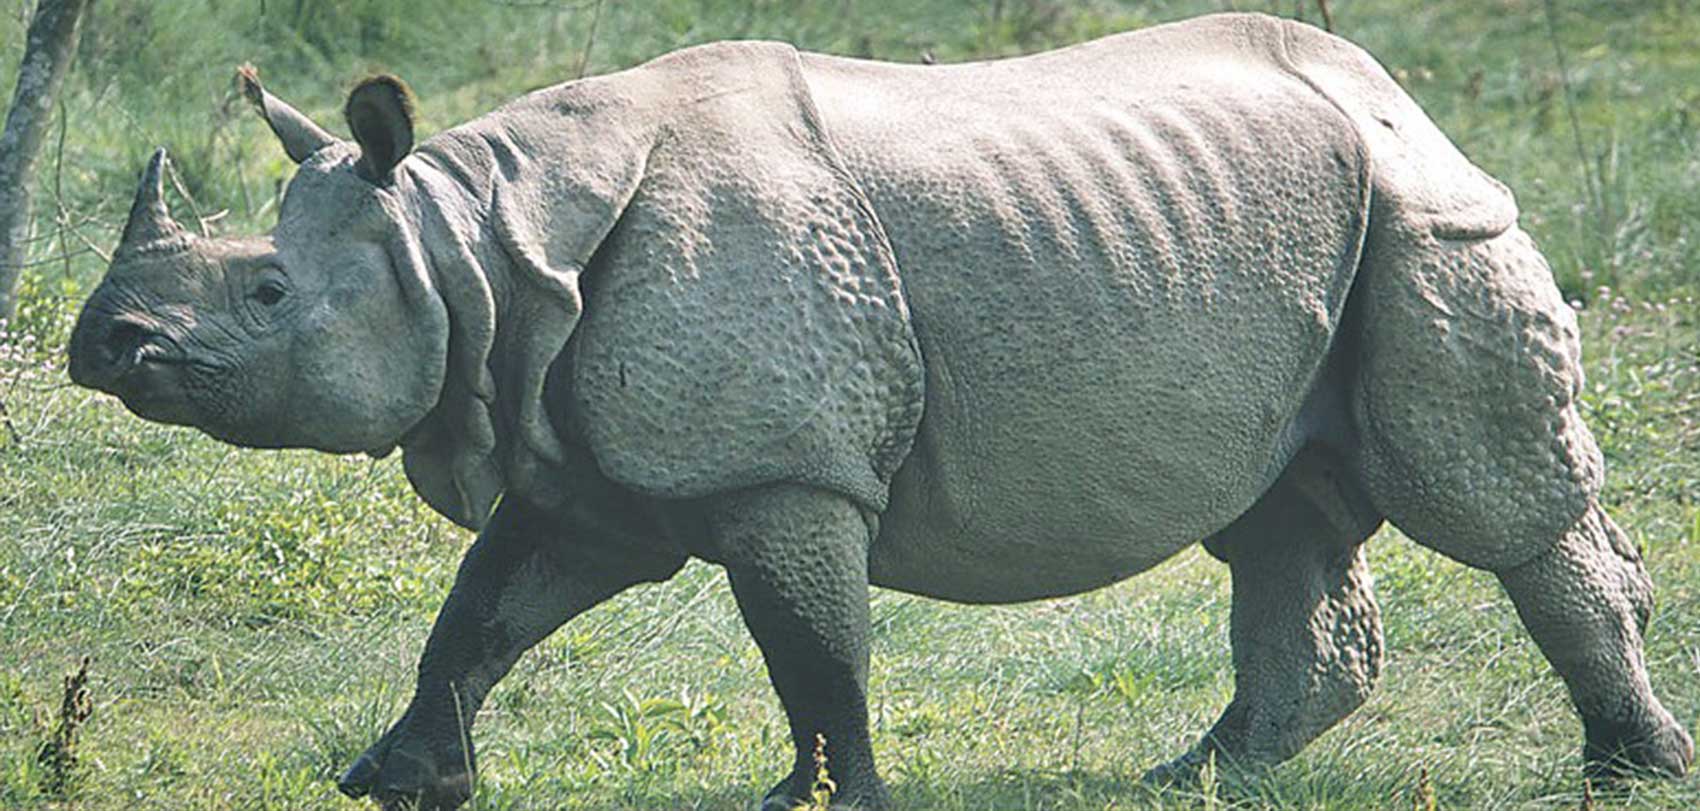 covid-19-rhino-census-not-taking-place-this-year